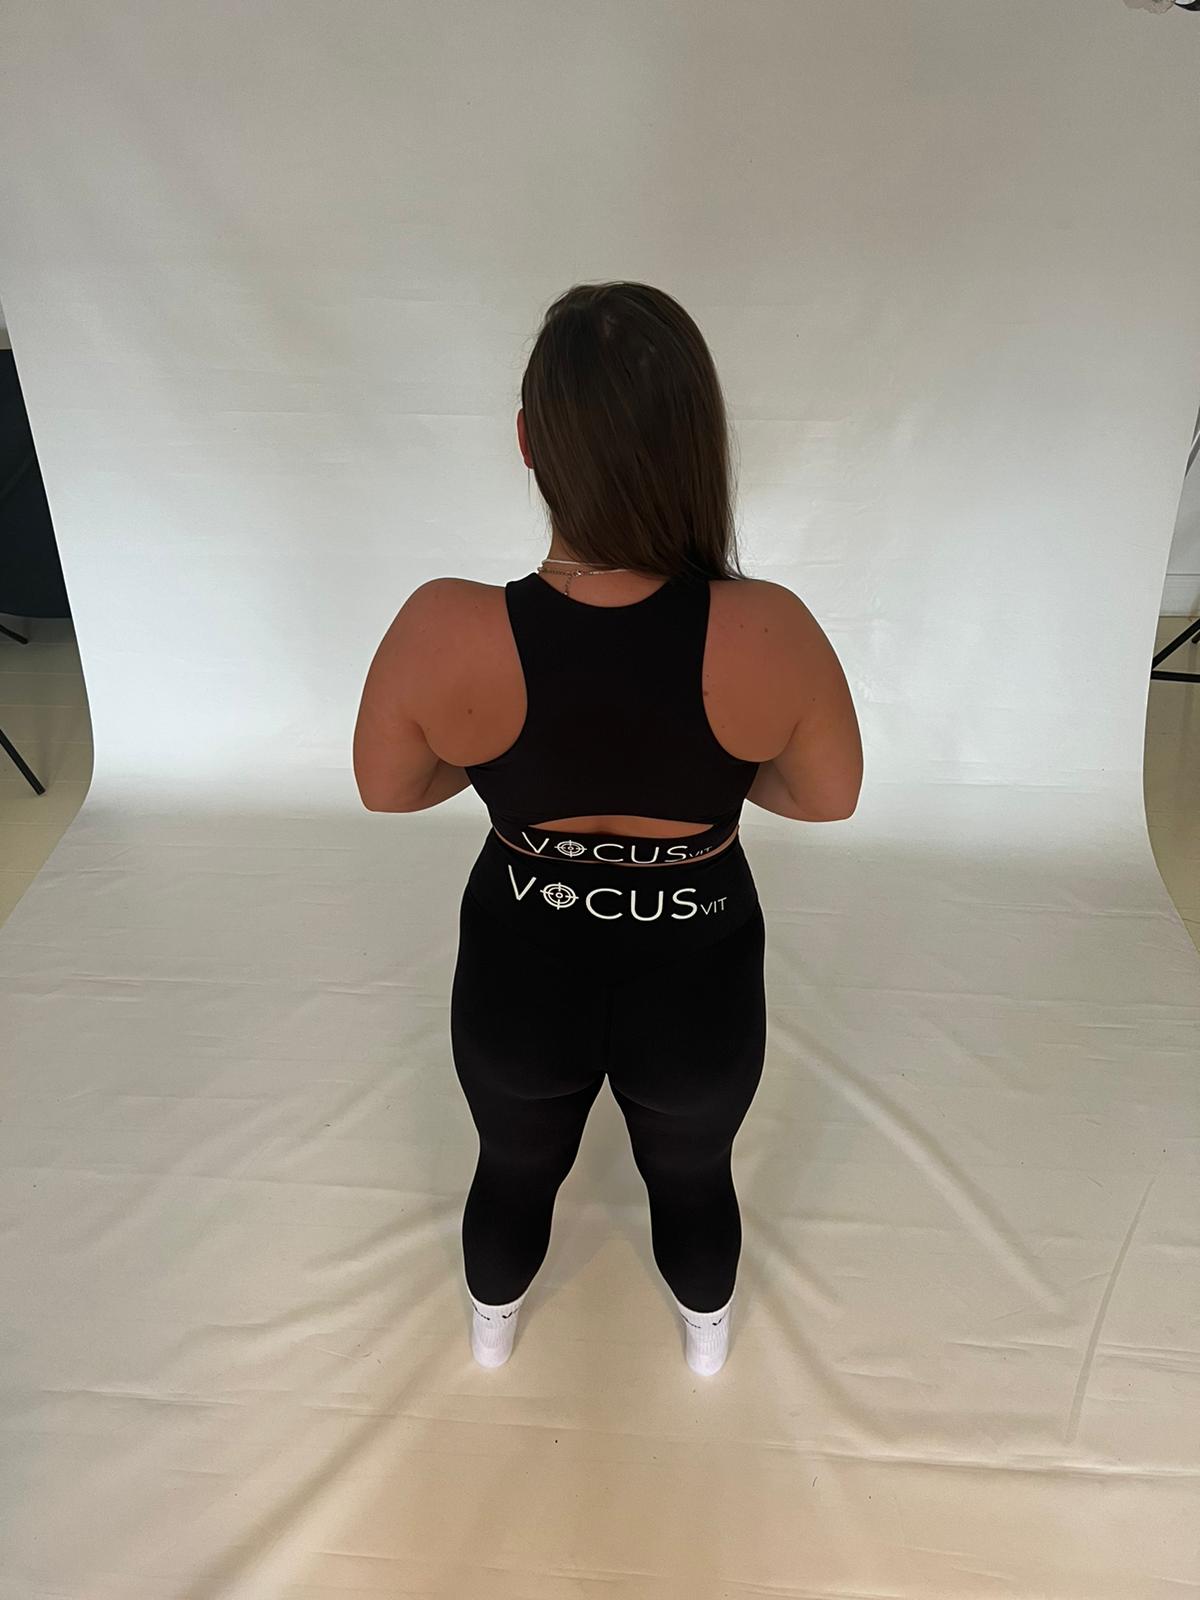 girl standing back to camera wearing black sports bra and leggings from vocus vit. Vocus vit is a sustainable women's activewear brand that uses recycled materials and ethical manufacturing. Based in Northern Ireland. Shipping worldwide.Sizes XS (8) TO XXL (18).